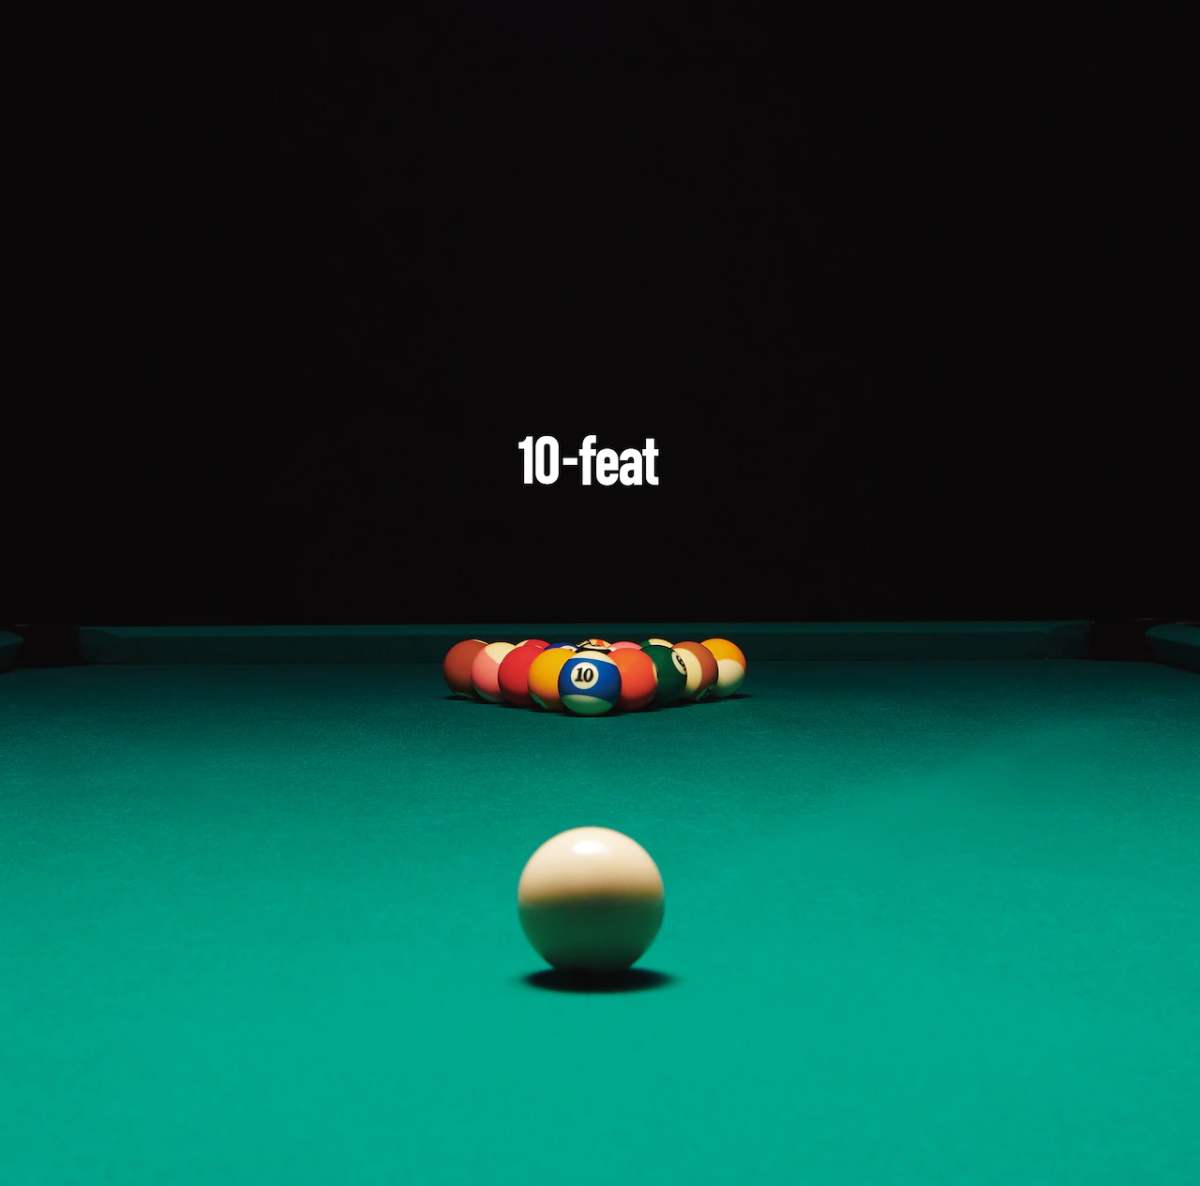 Cover art for『10-FEET - Fin feat. CreepHyp』from the release『10-feat』